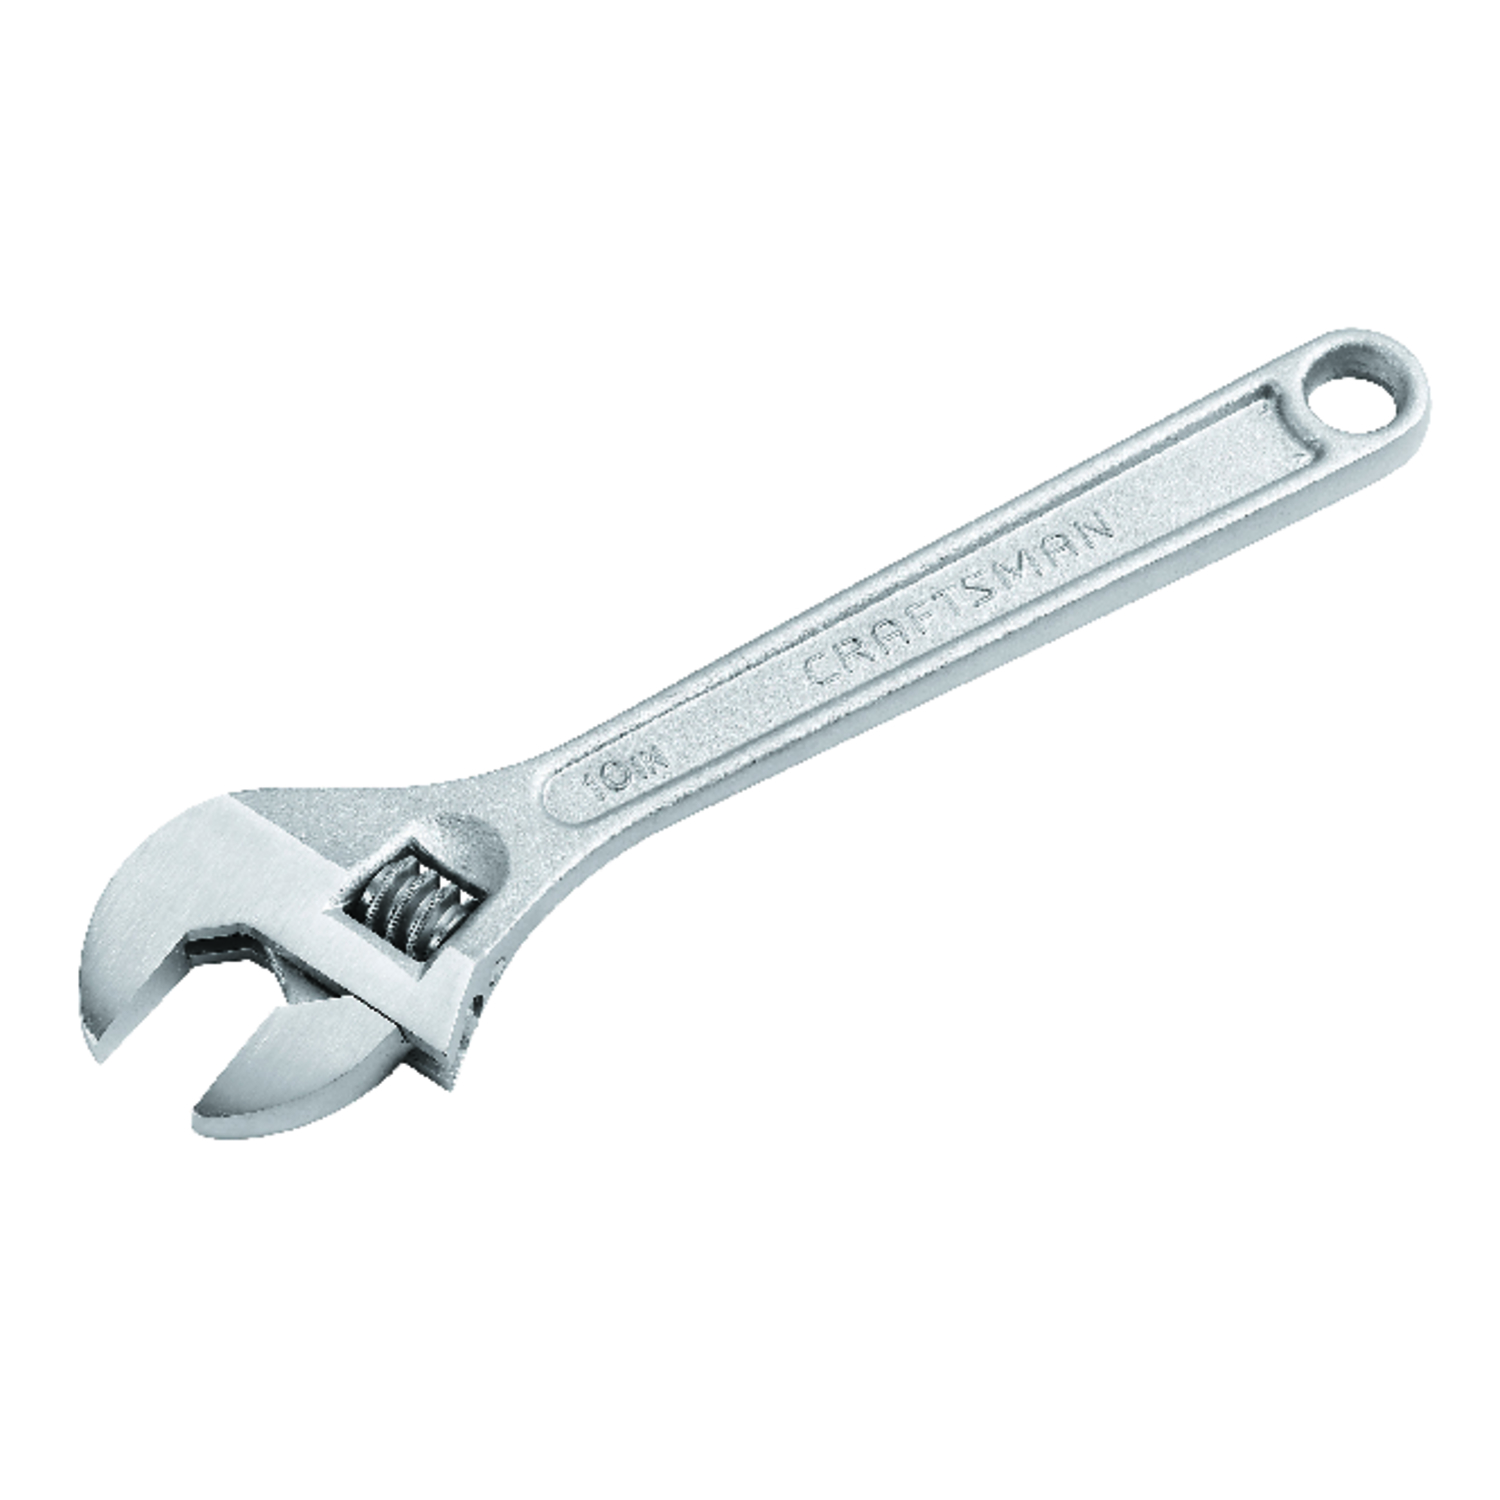 UPC 885911594141 product image for Craftsman 10 in. L Adjustable Wrench 1 pc. | upcitemdb.com